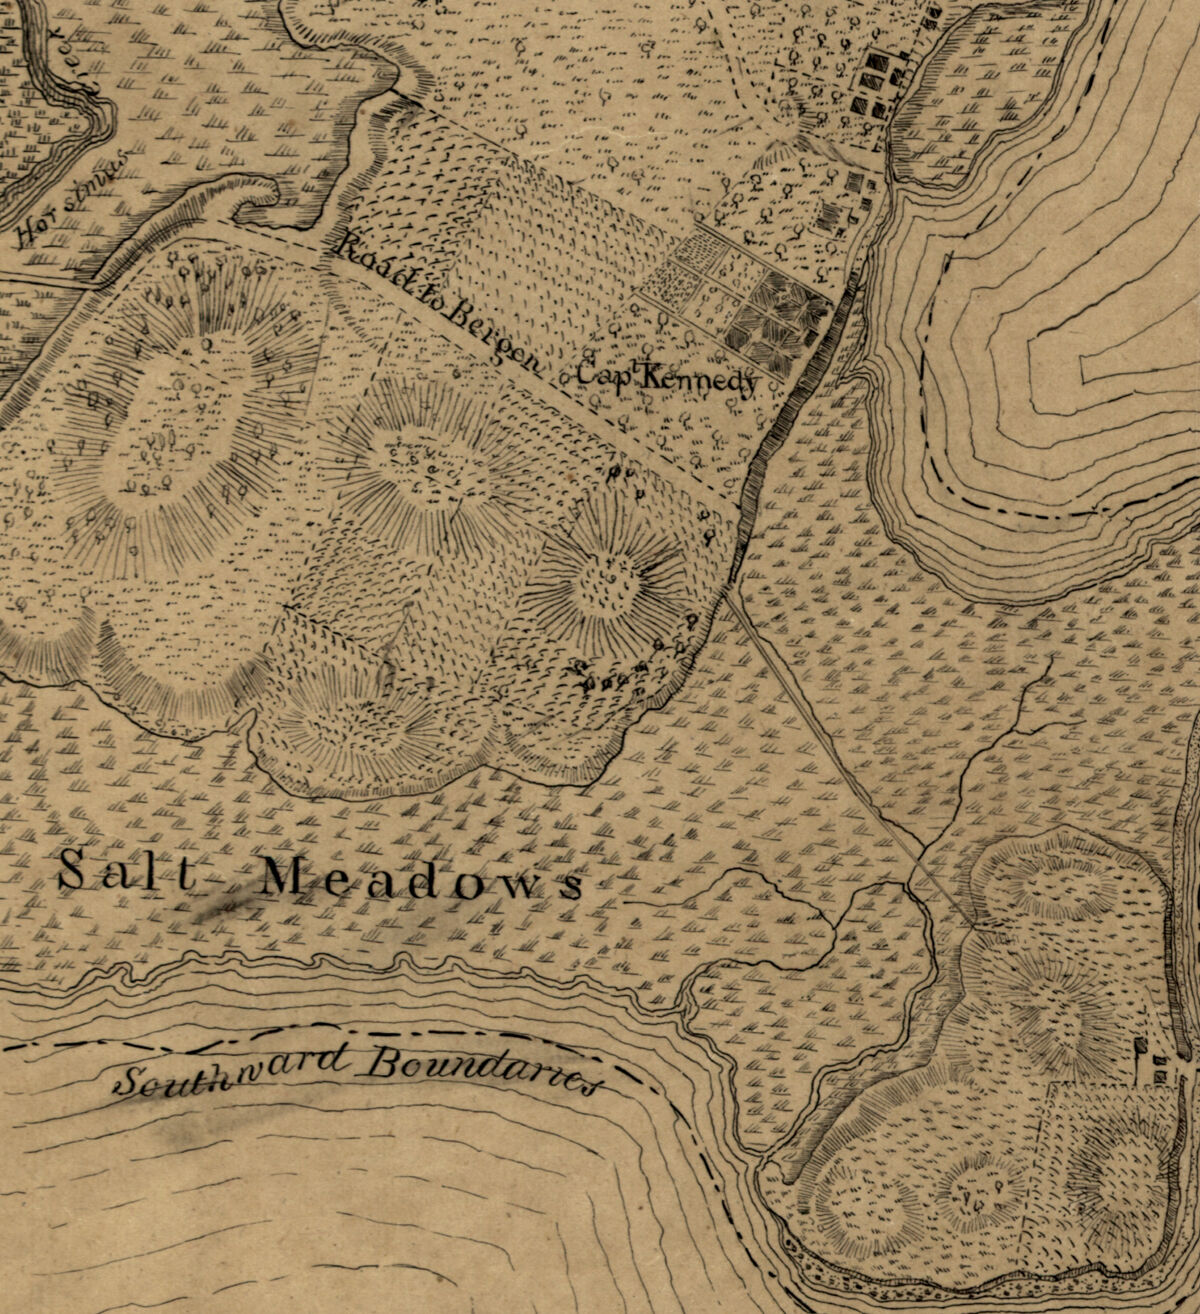 Excerpt from a ~1767 map showing the west shore of the North or Hudson River, from the Library of Congress Geography and Map Division.